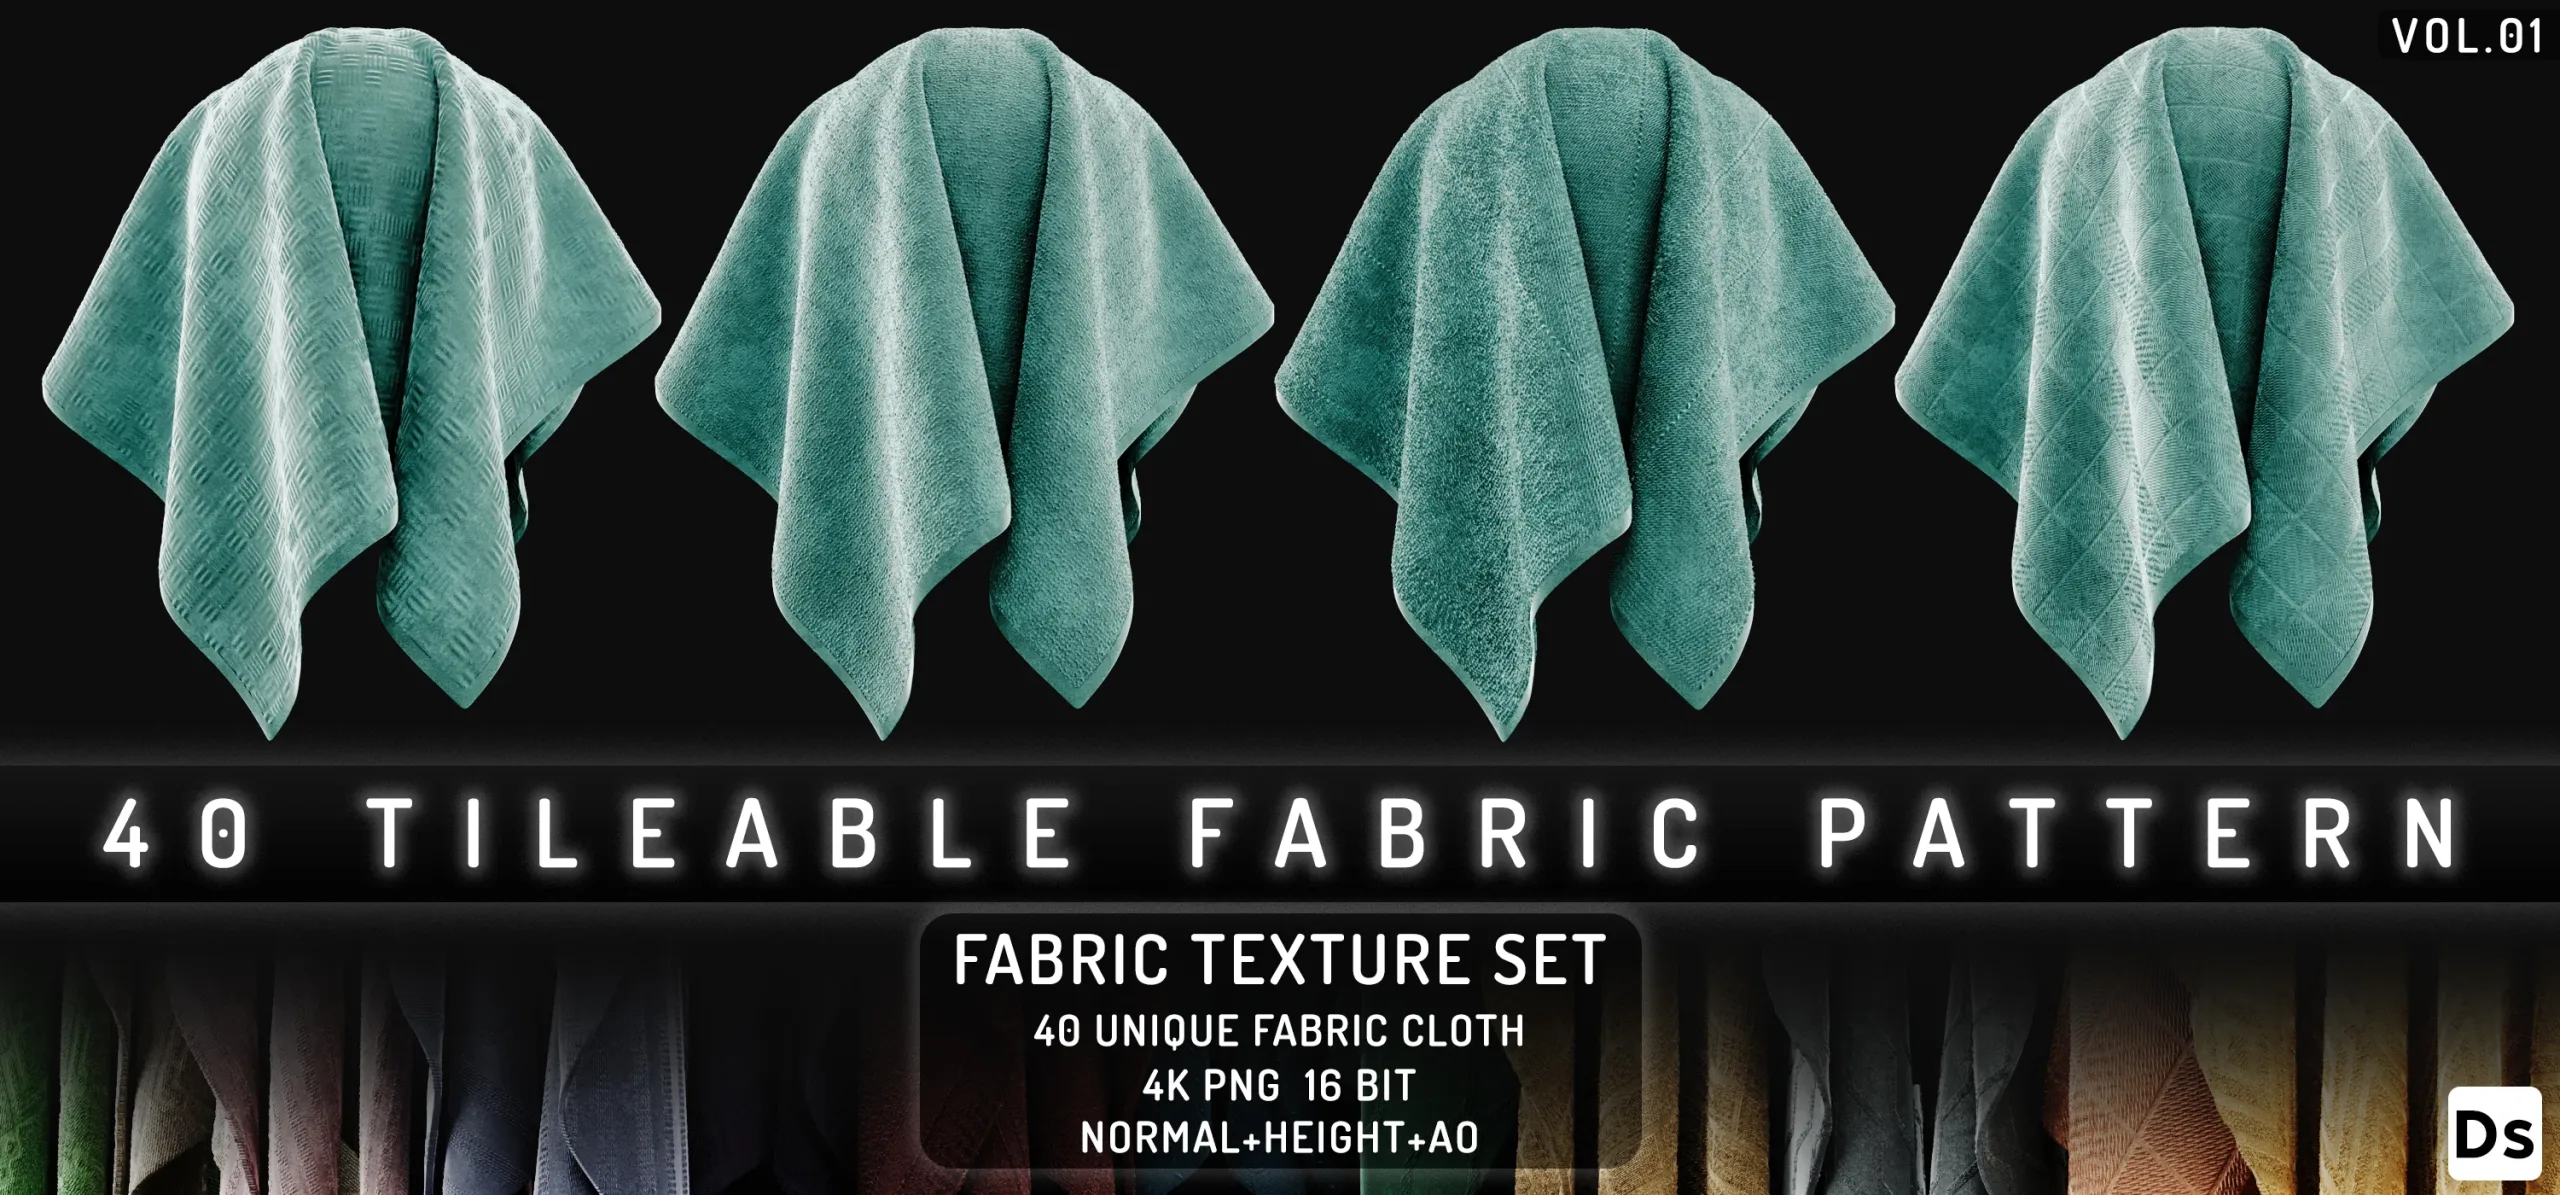 40 TILEABLE FABRIC PATTERN VOL.01